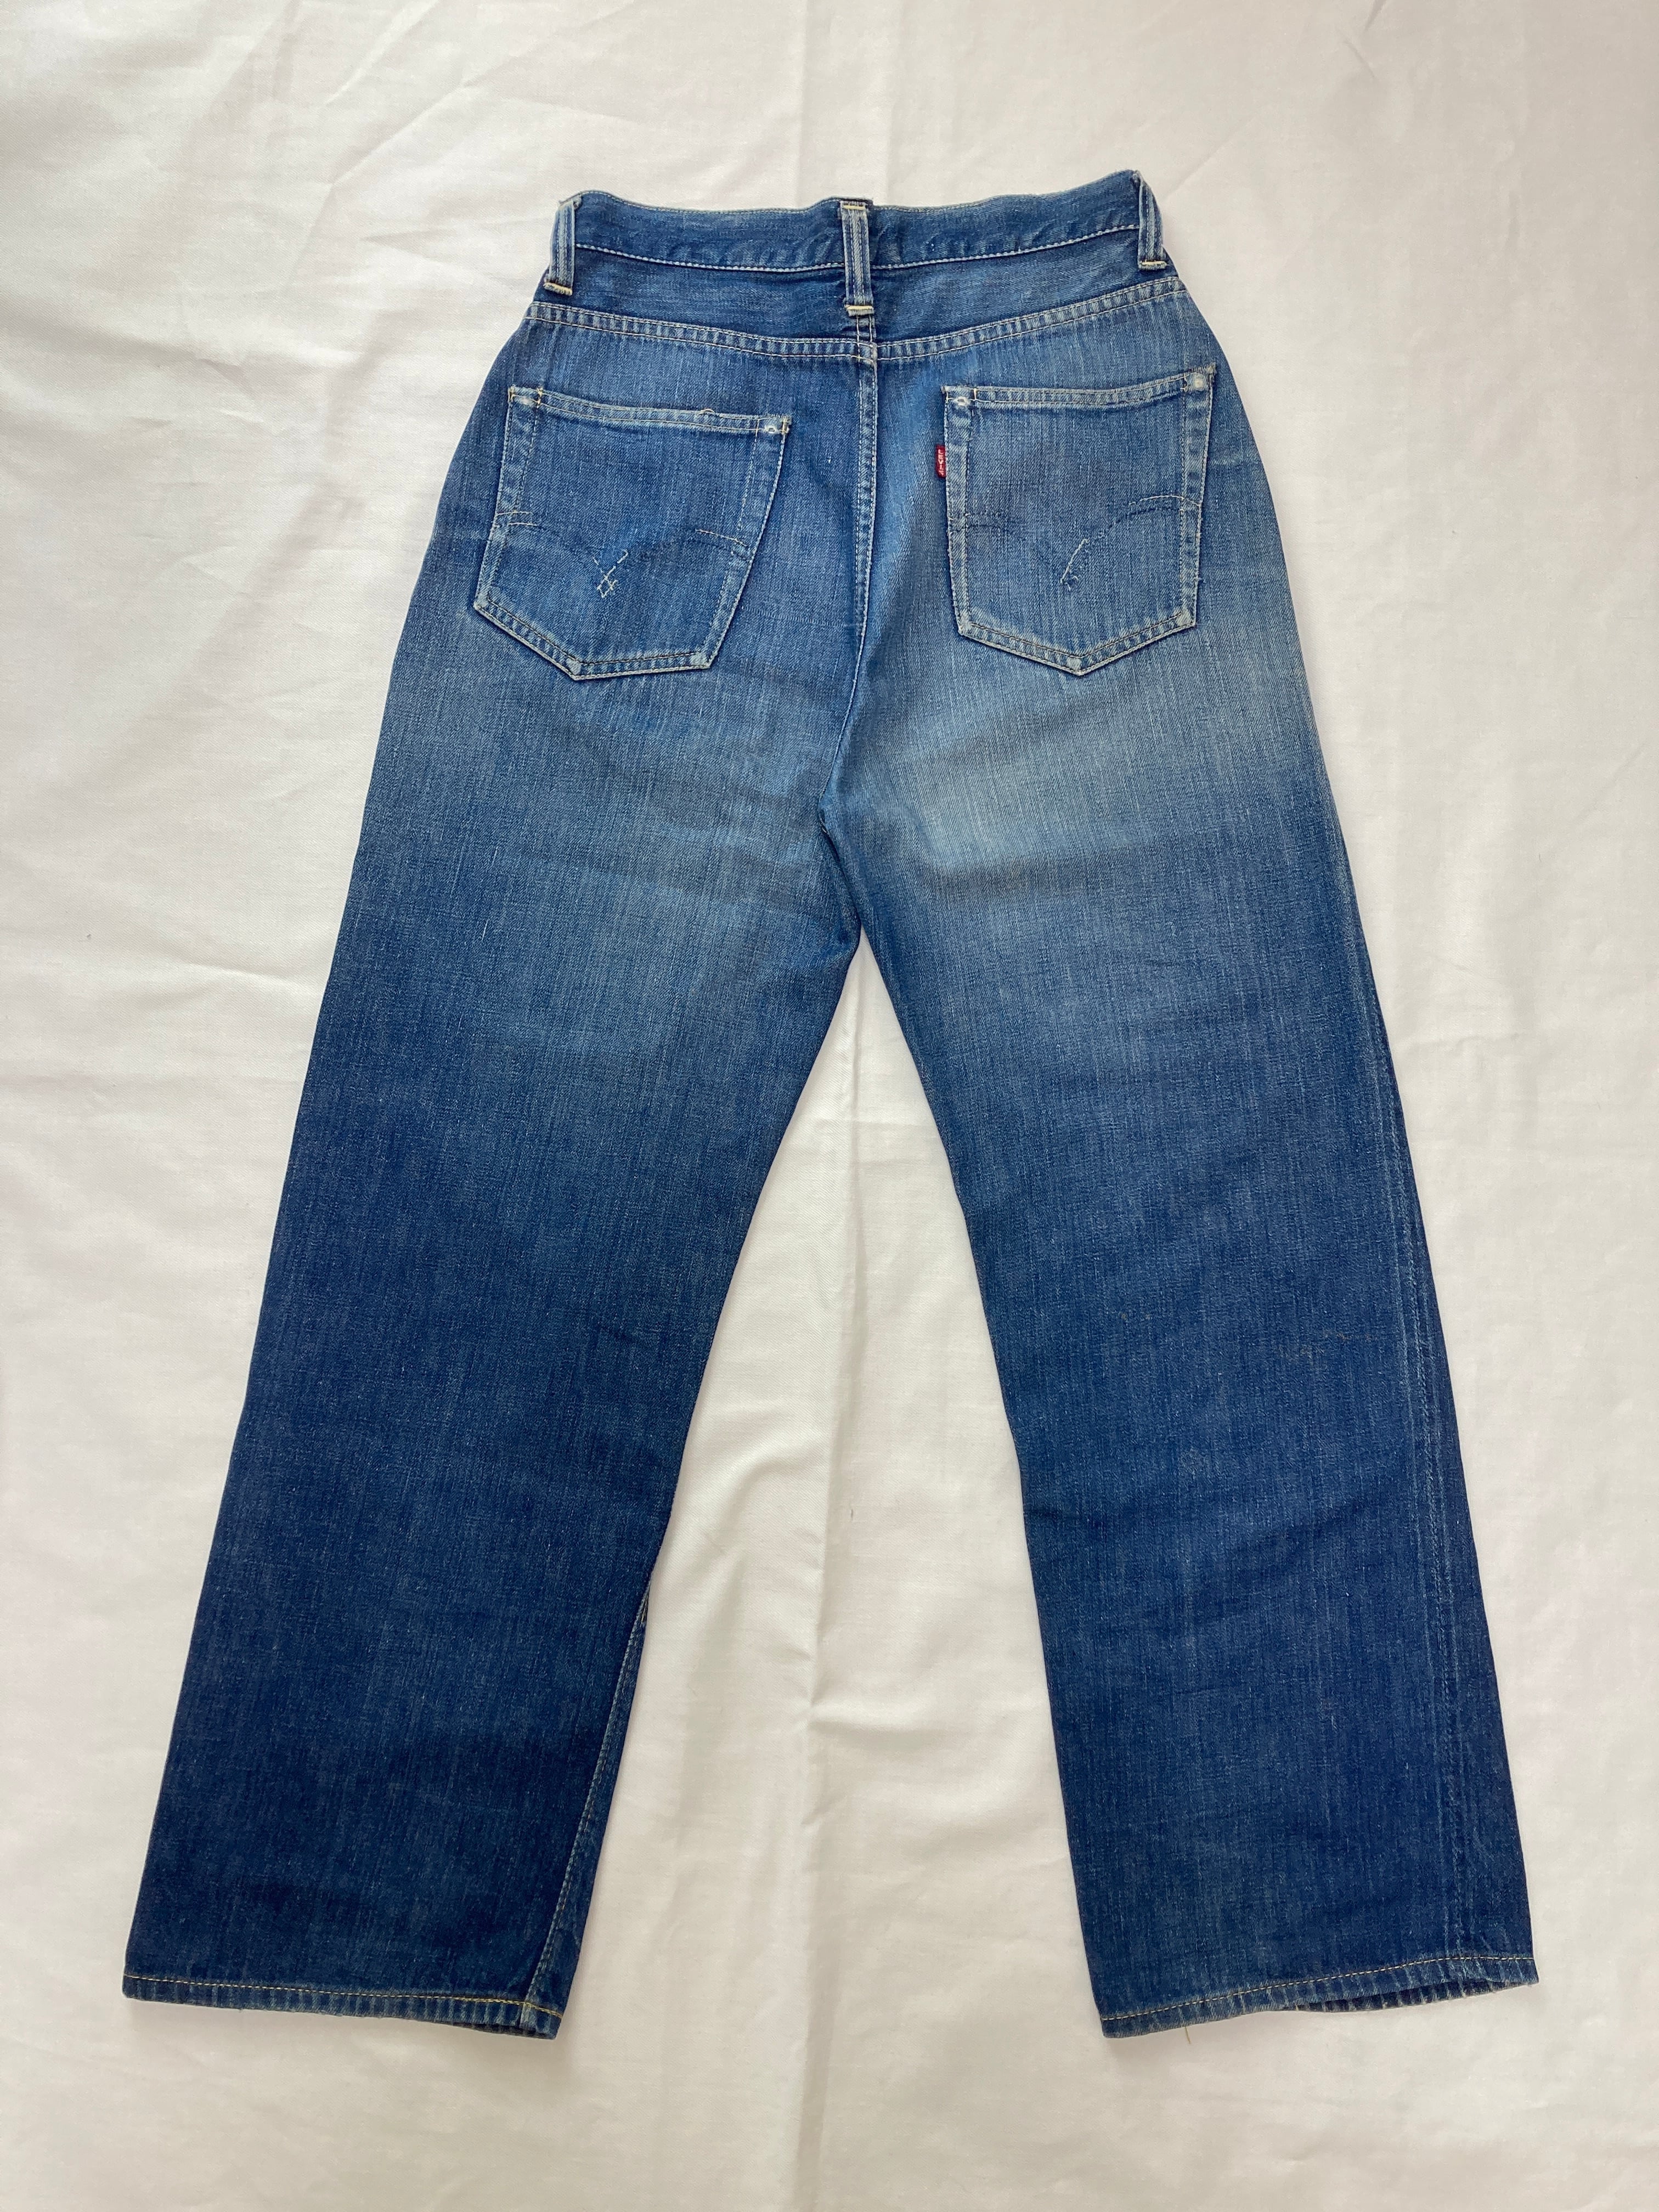 Levi's 701 1940's ORIGINAL MADE IN U.S.A | YIELD VINTAGE